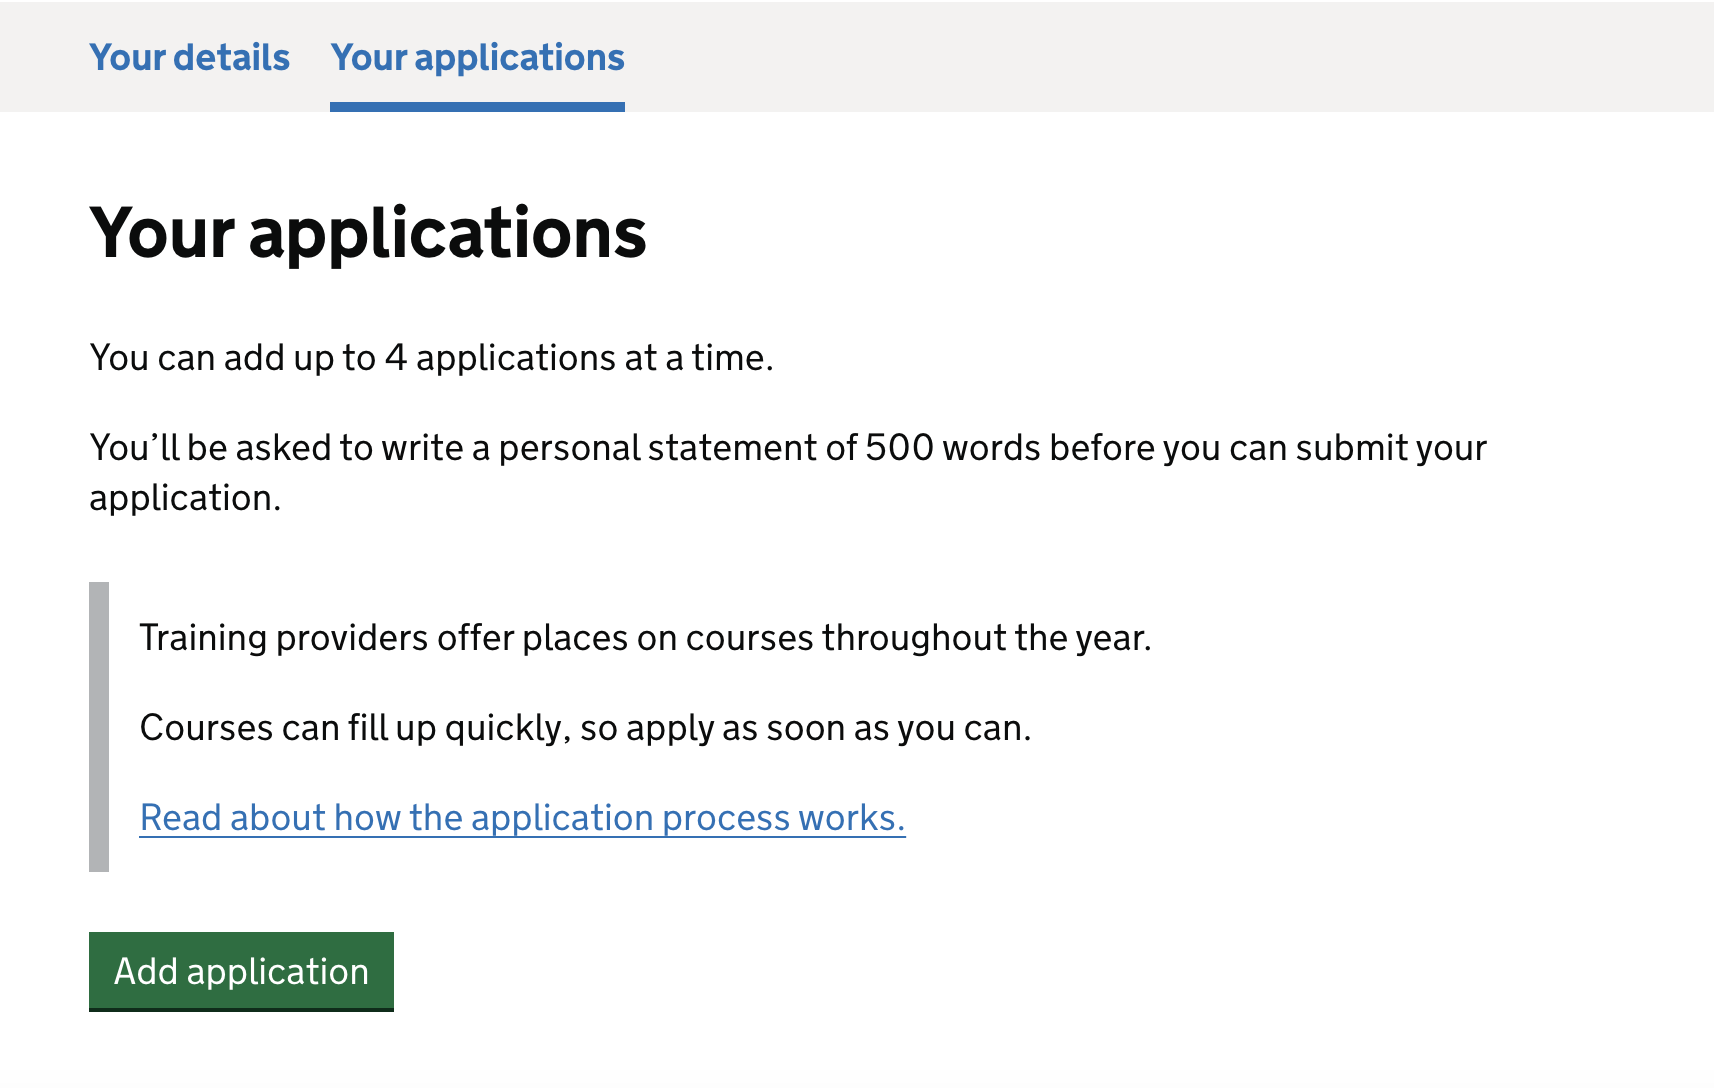 Scheenshot showing text on the 'Your applications' tab. The text tells candidates they will need to write a personal statement before submitting their application.